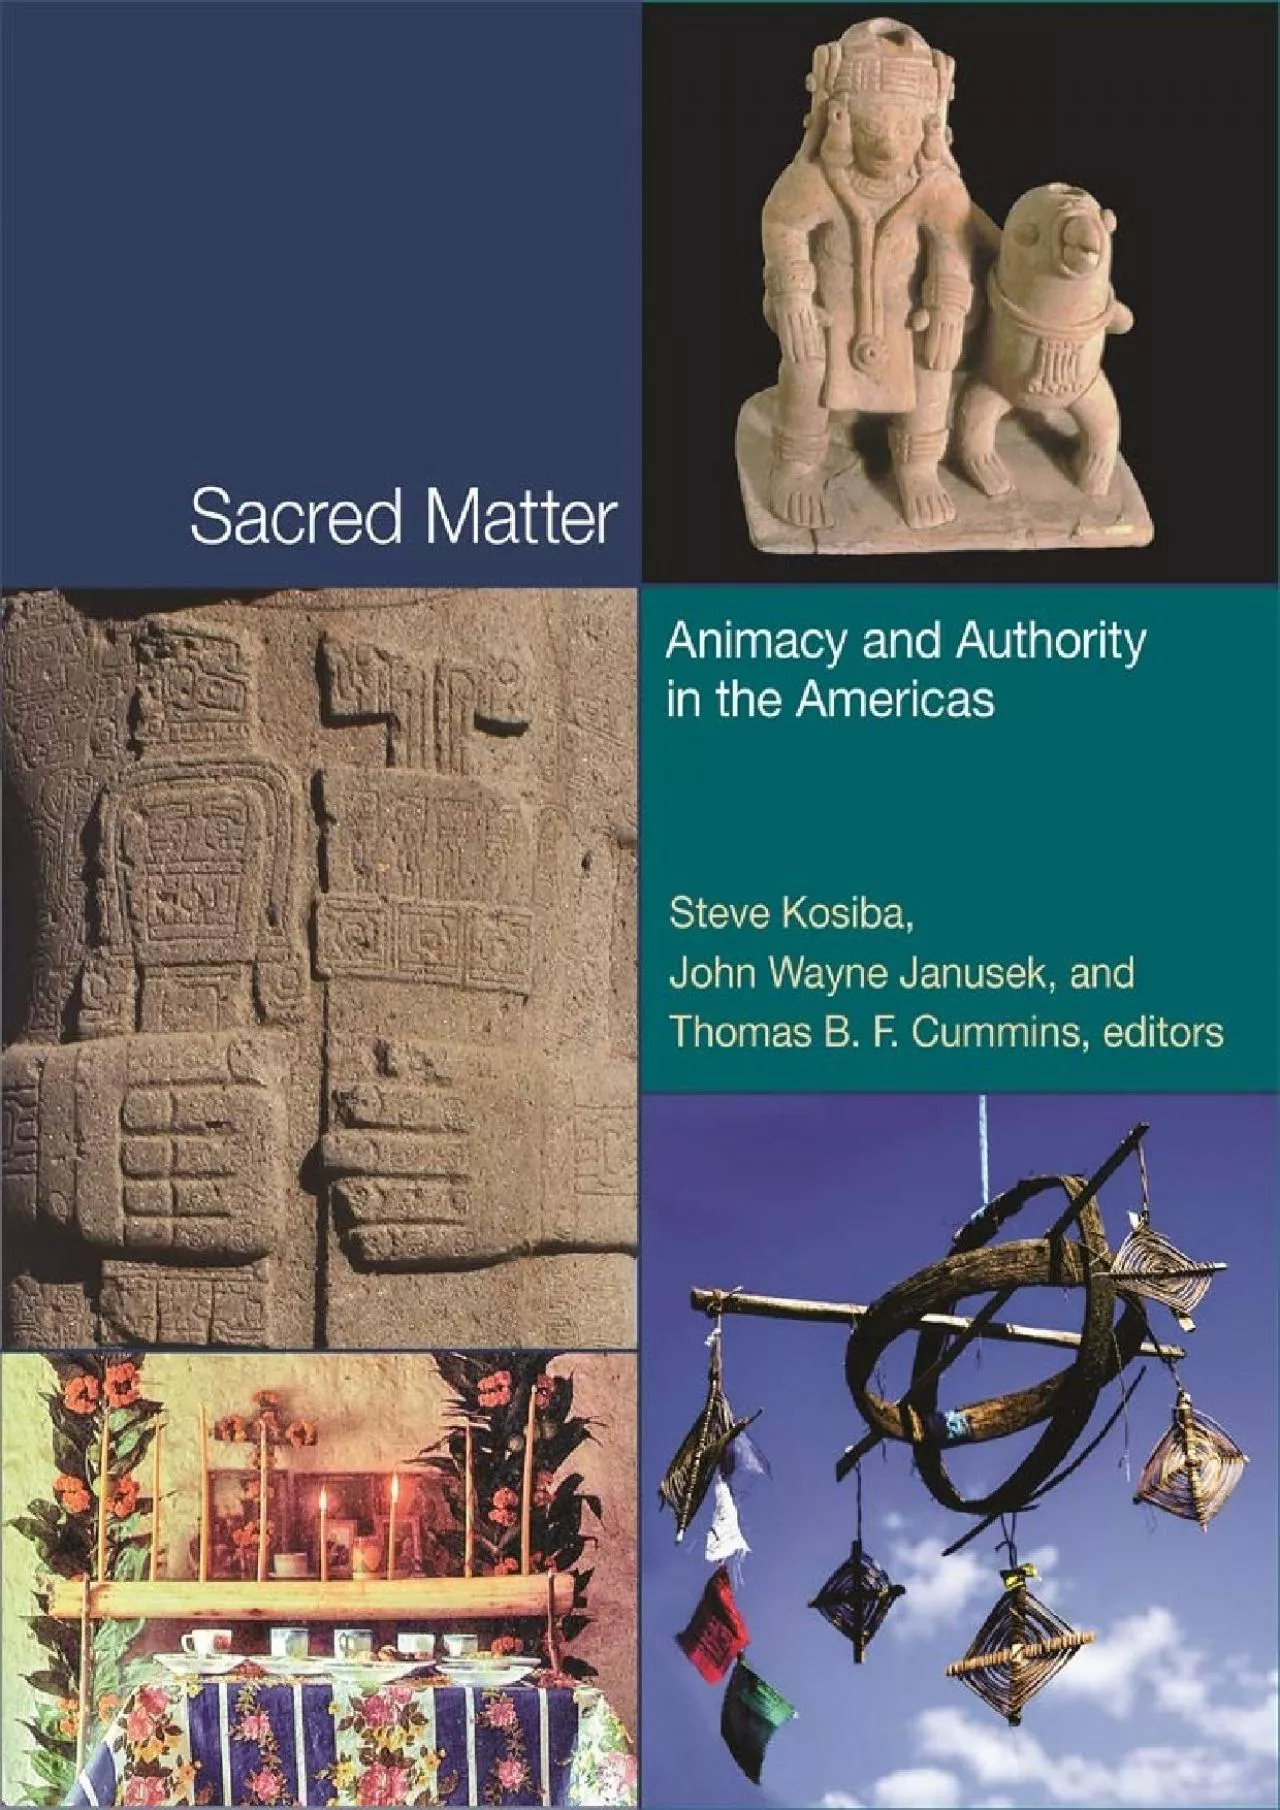 (BOOK)-Sacred Matter: Animacy and Authority in the Americas (Dumbarton Oaks Pre-Columbian